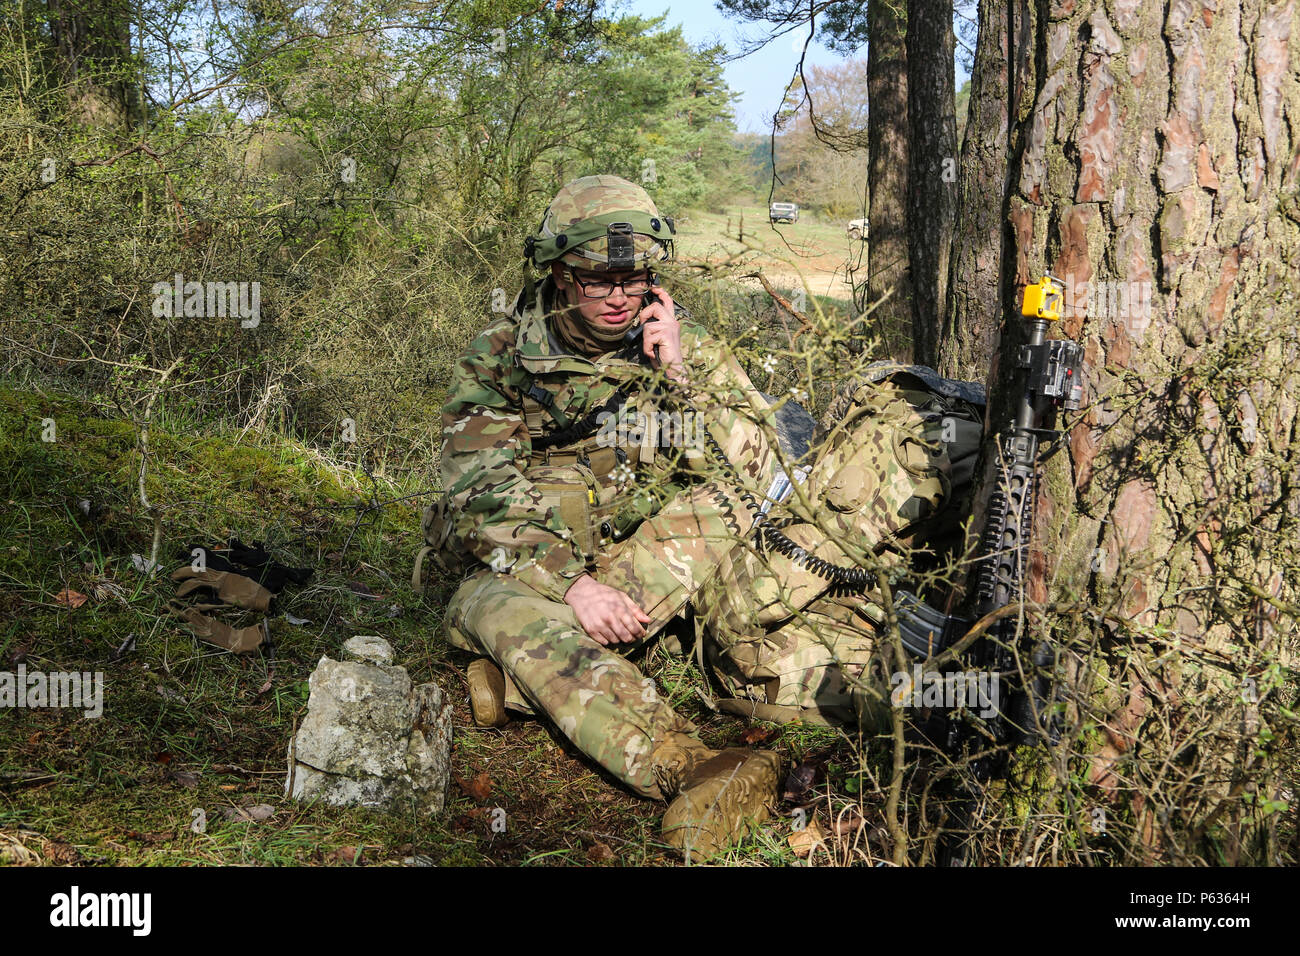 A U.S. Soldier of the 173rd Airborne Brigade transmits mission updates as part of tactical operations during exercise Saber Junction 16 at the U.S. Army’s Joint Multinational Readiness Center (JMRC) in Hohenfels, Germany, April 14, 2016. Saber Junction 16 is the U.S. Army Europe’s 173rd Airborne Brigade’s combat training center certification exercise, taking place at the JMRC in Hohenfels, Germany, Mar. 31-Apr. 24, 2016.  The exercise is designed to evaluate the readiness of the Army’s Europe-based combat brigades to conduct unified land operations and promote interoperability in a joint, mult Stock Photo